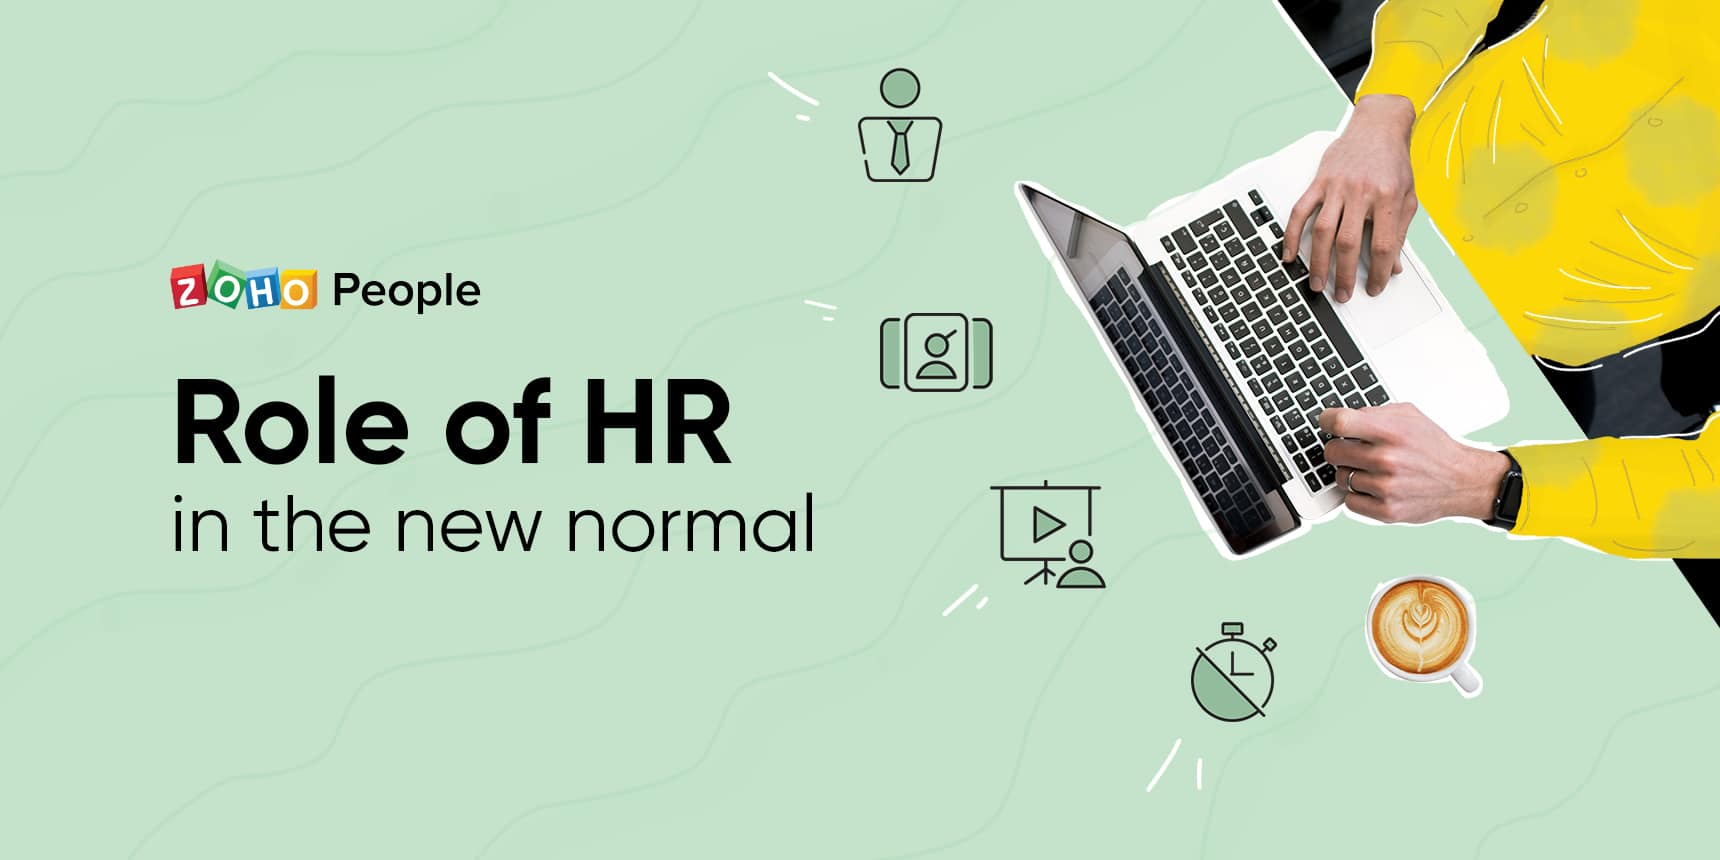 Role of HR in the new normal